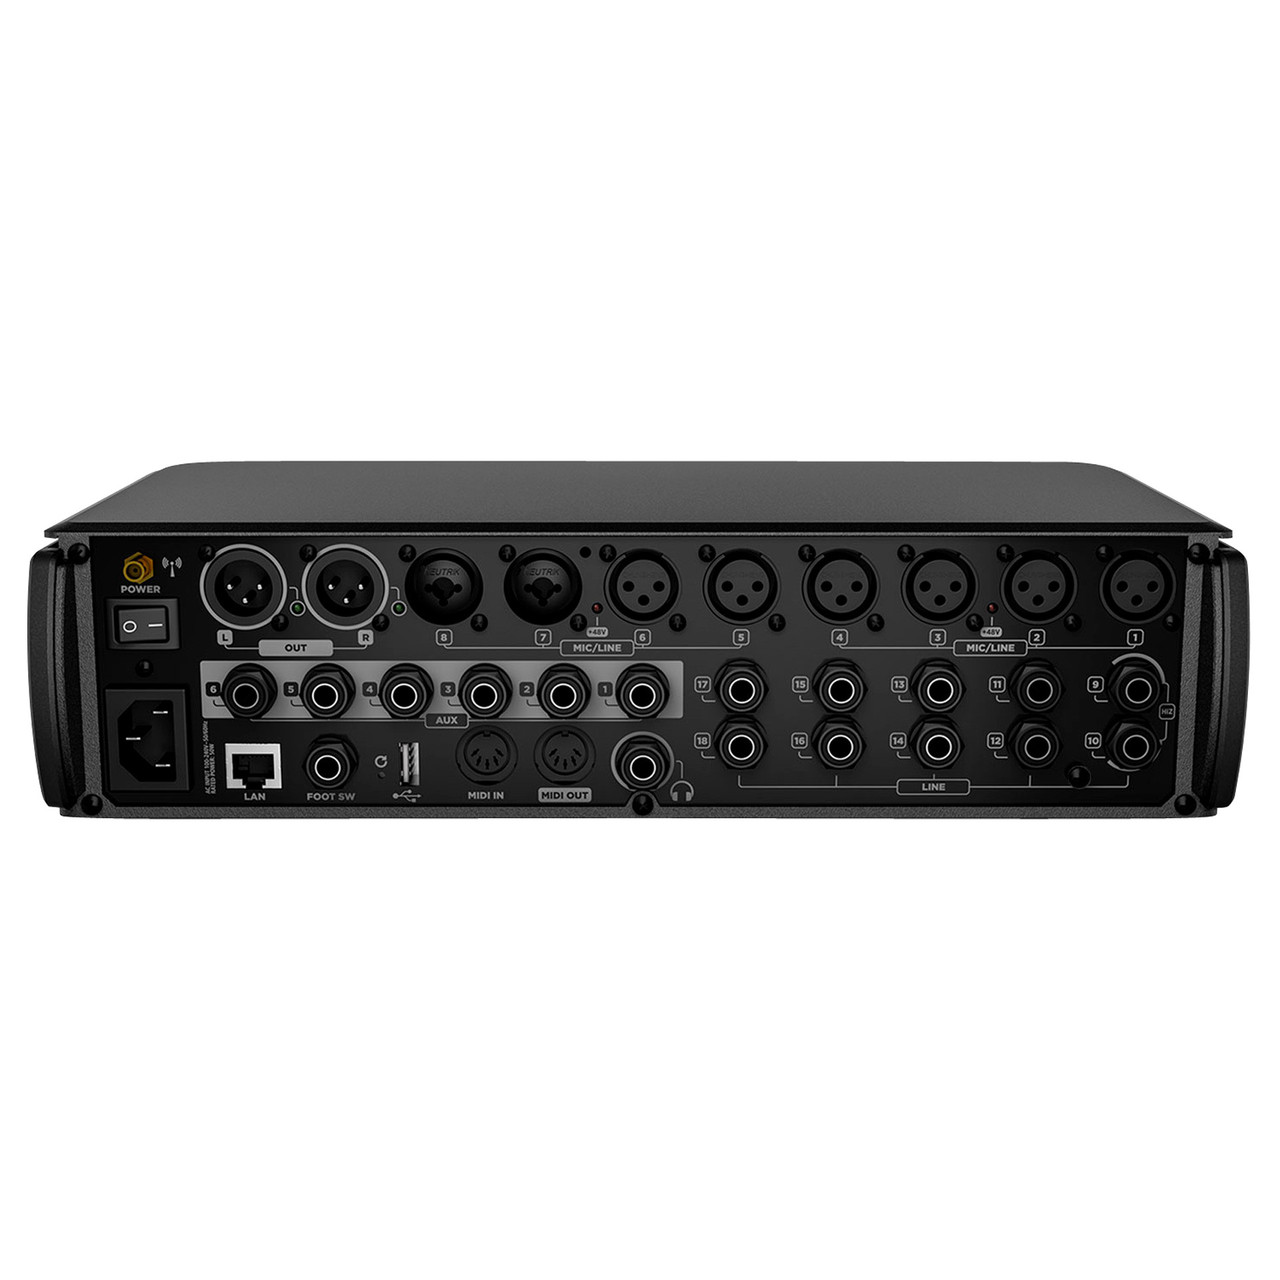 Rådne Ulydighed Settlers RCF M 18 18-Channel Wi-Fi Controlled Digital Mixer - Sound Productions